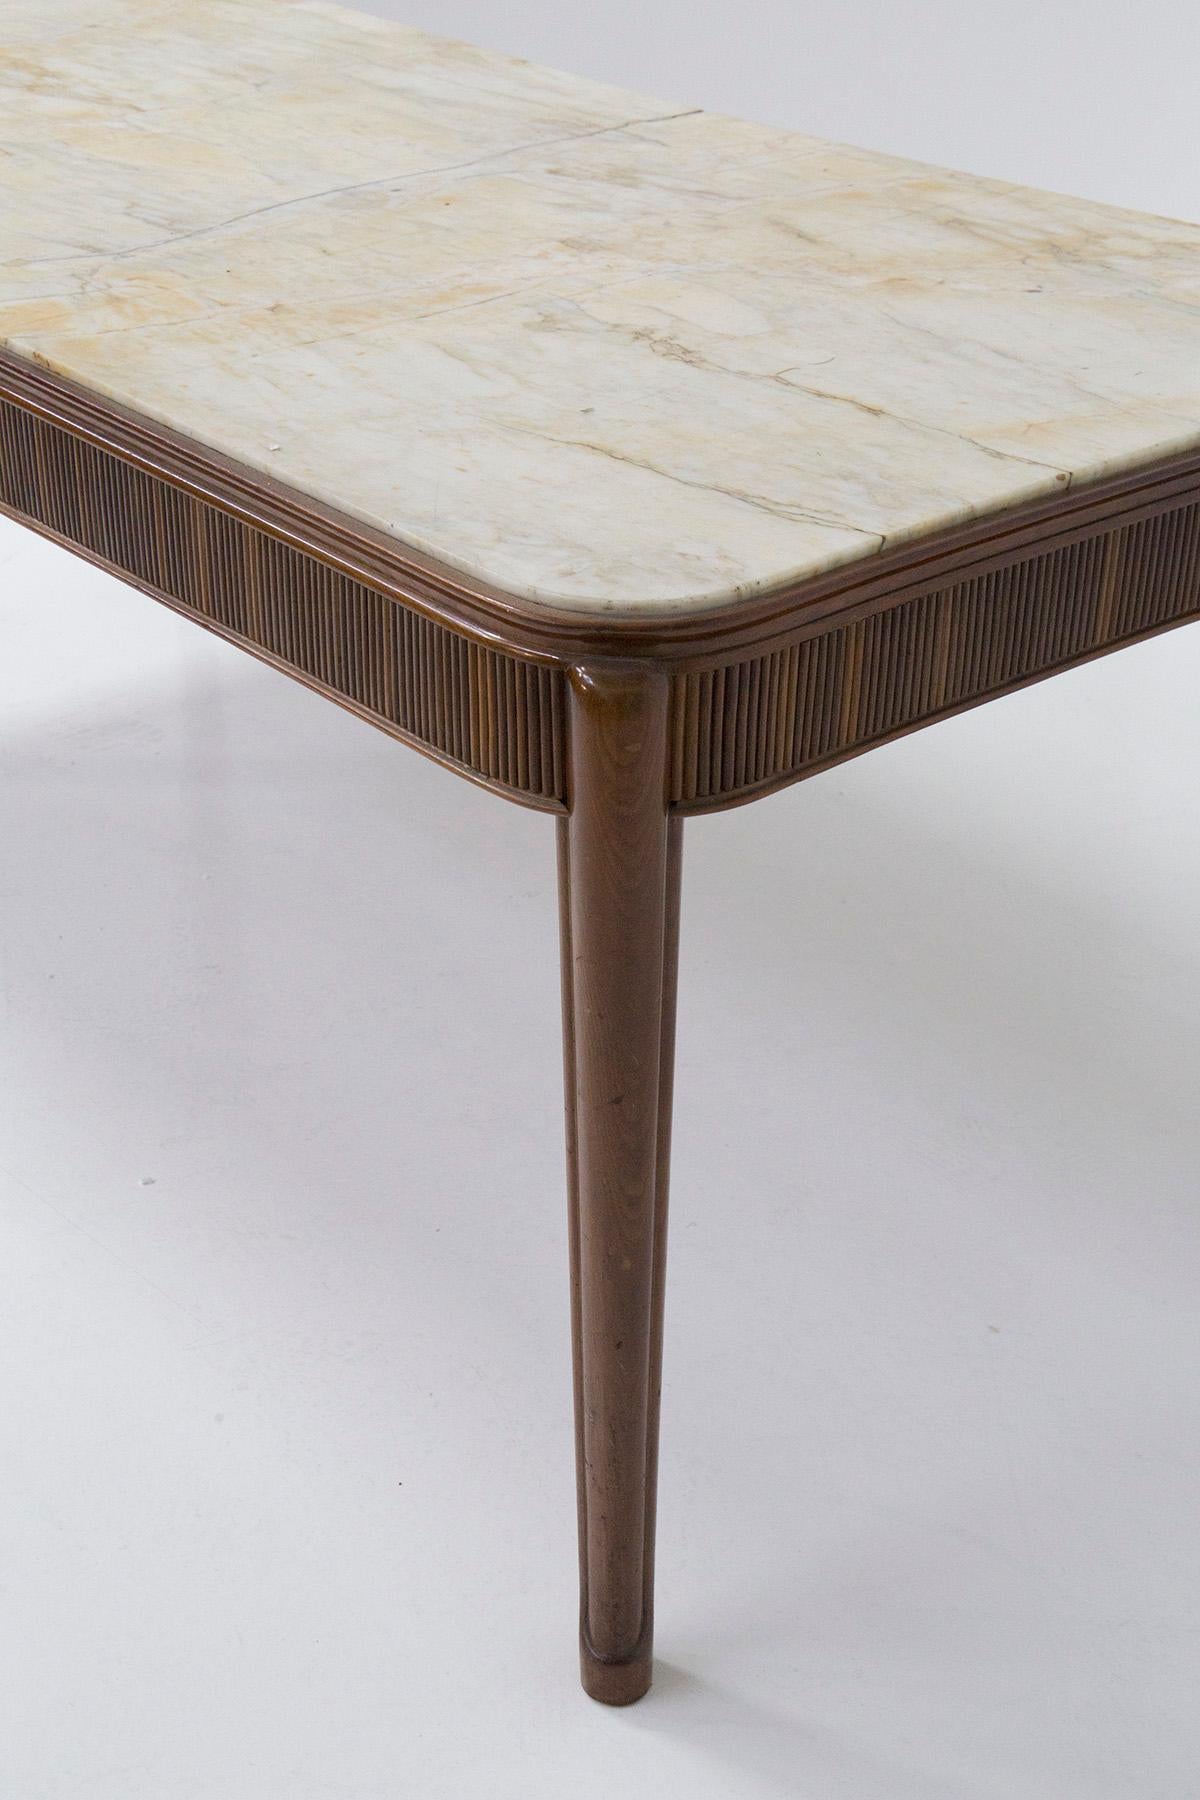 Italian Gino Rancati Wood and Marble Dining Table For Sale